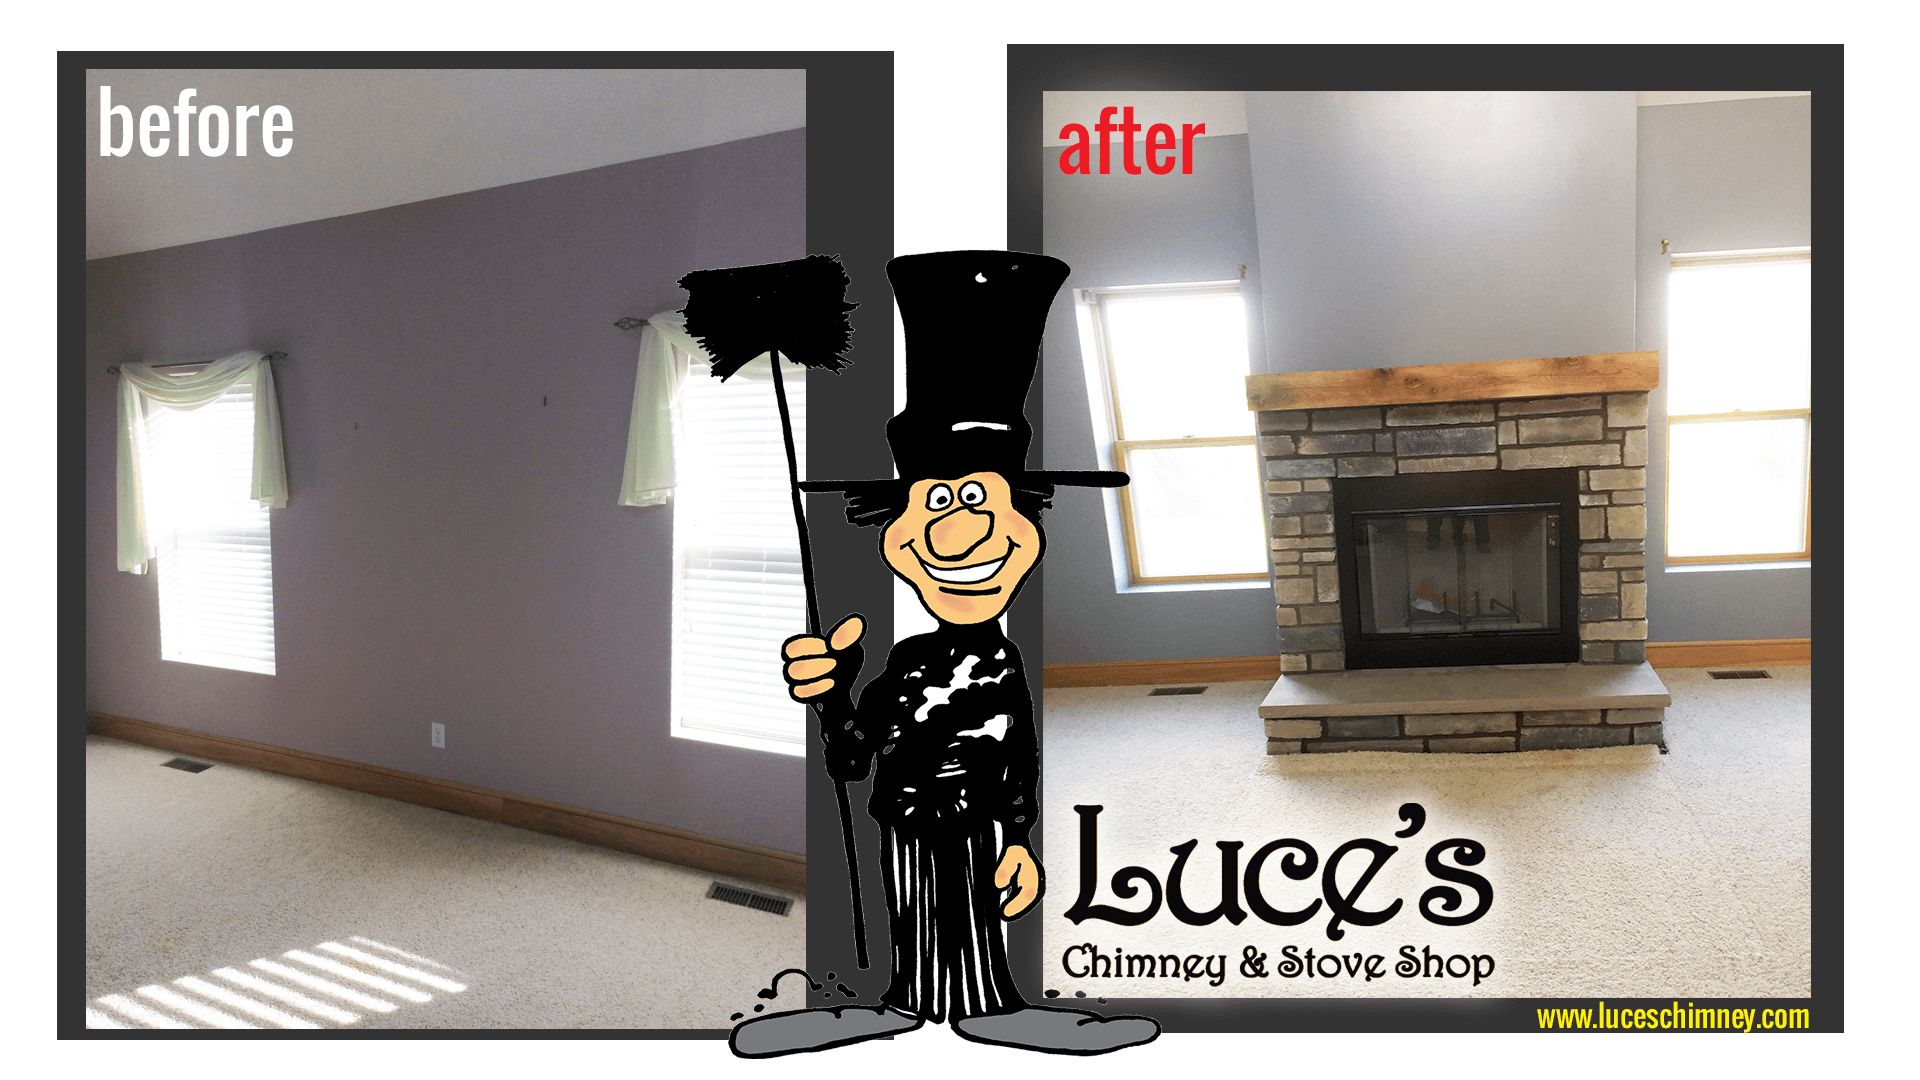 Fireplace design and installation. Stone fireplace design by Luce's Chimney and Stove Shop, serving Ohio, Michigan and Indiana.